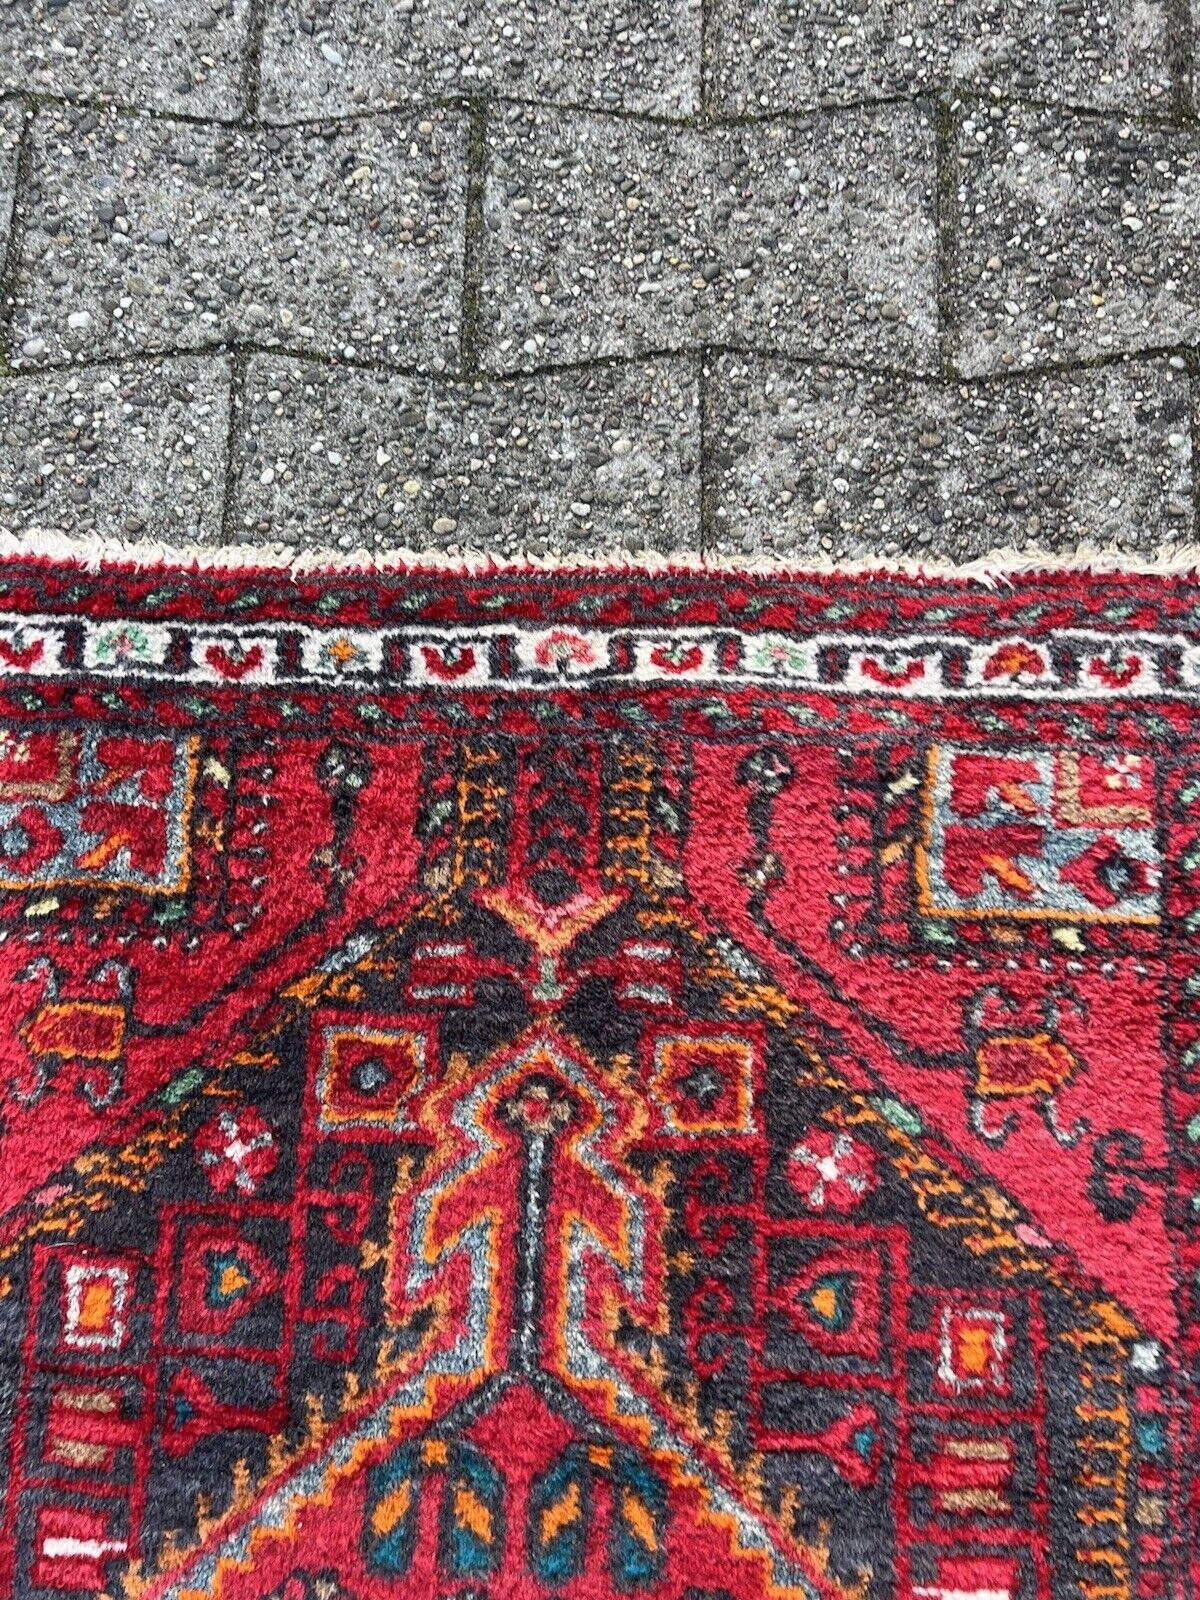 Handmade Vintage Persian Style Hamadan Rug
Overview:
Step into the splendor of our Handmade Vintage Persian Style Hamadan Rug, a testament to rich tradition and enduring craftsmanship. This authentic piece, dating back to the 1970s, exudes timeless